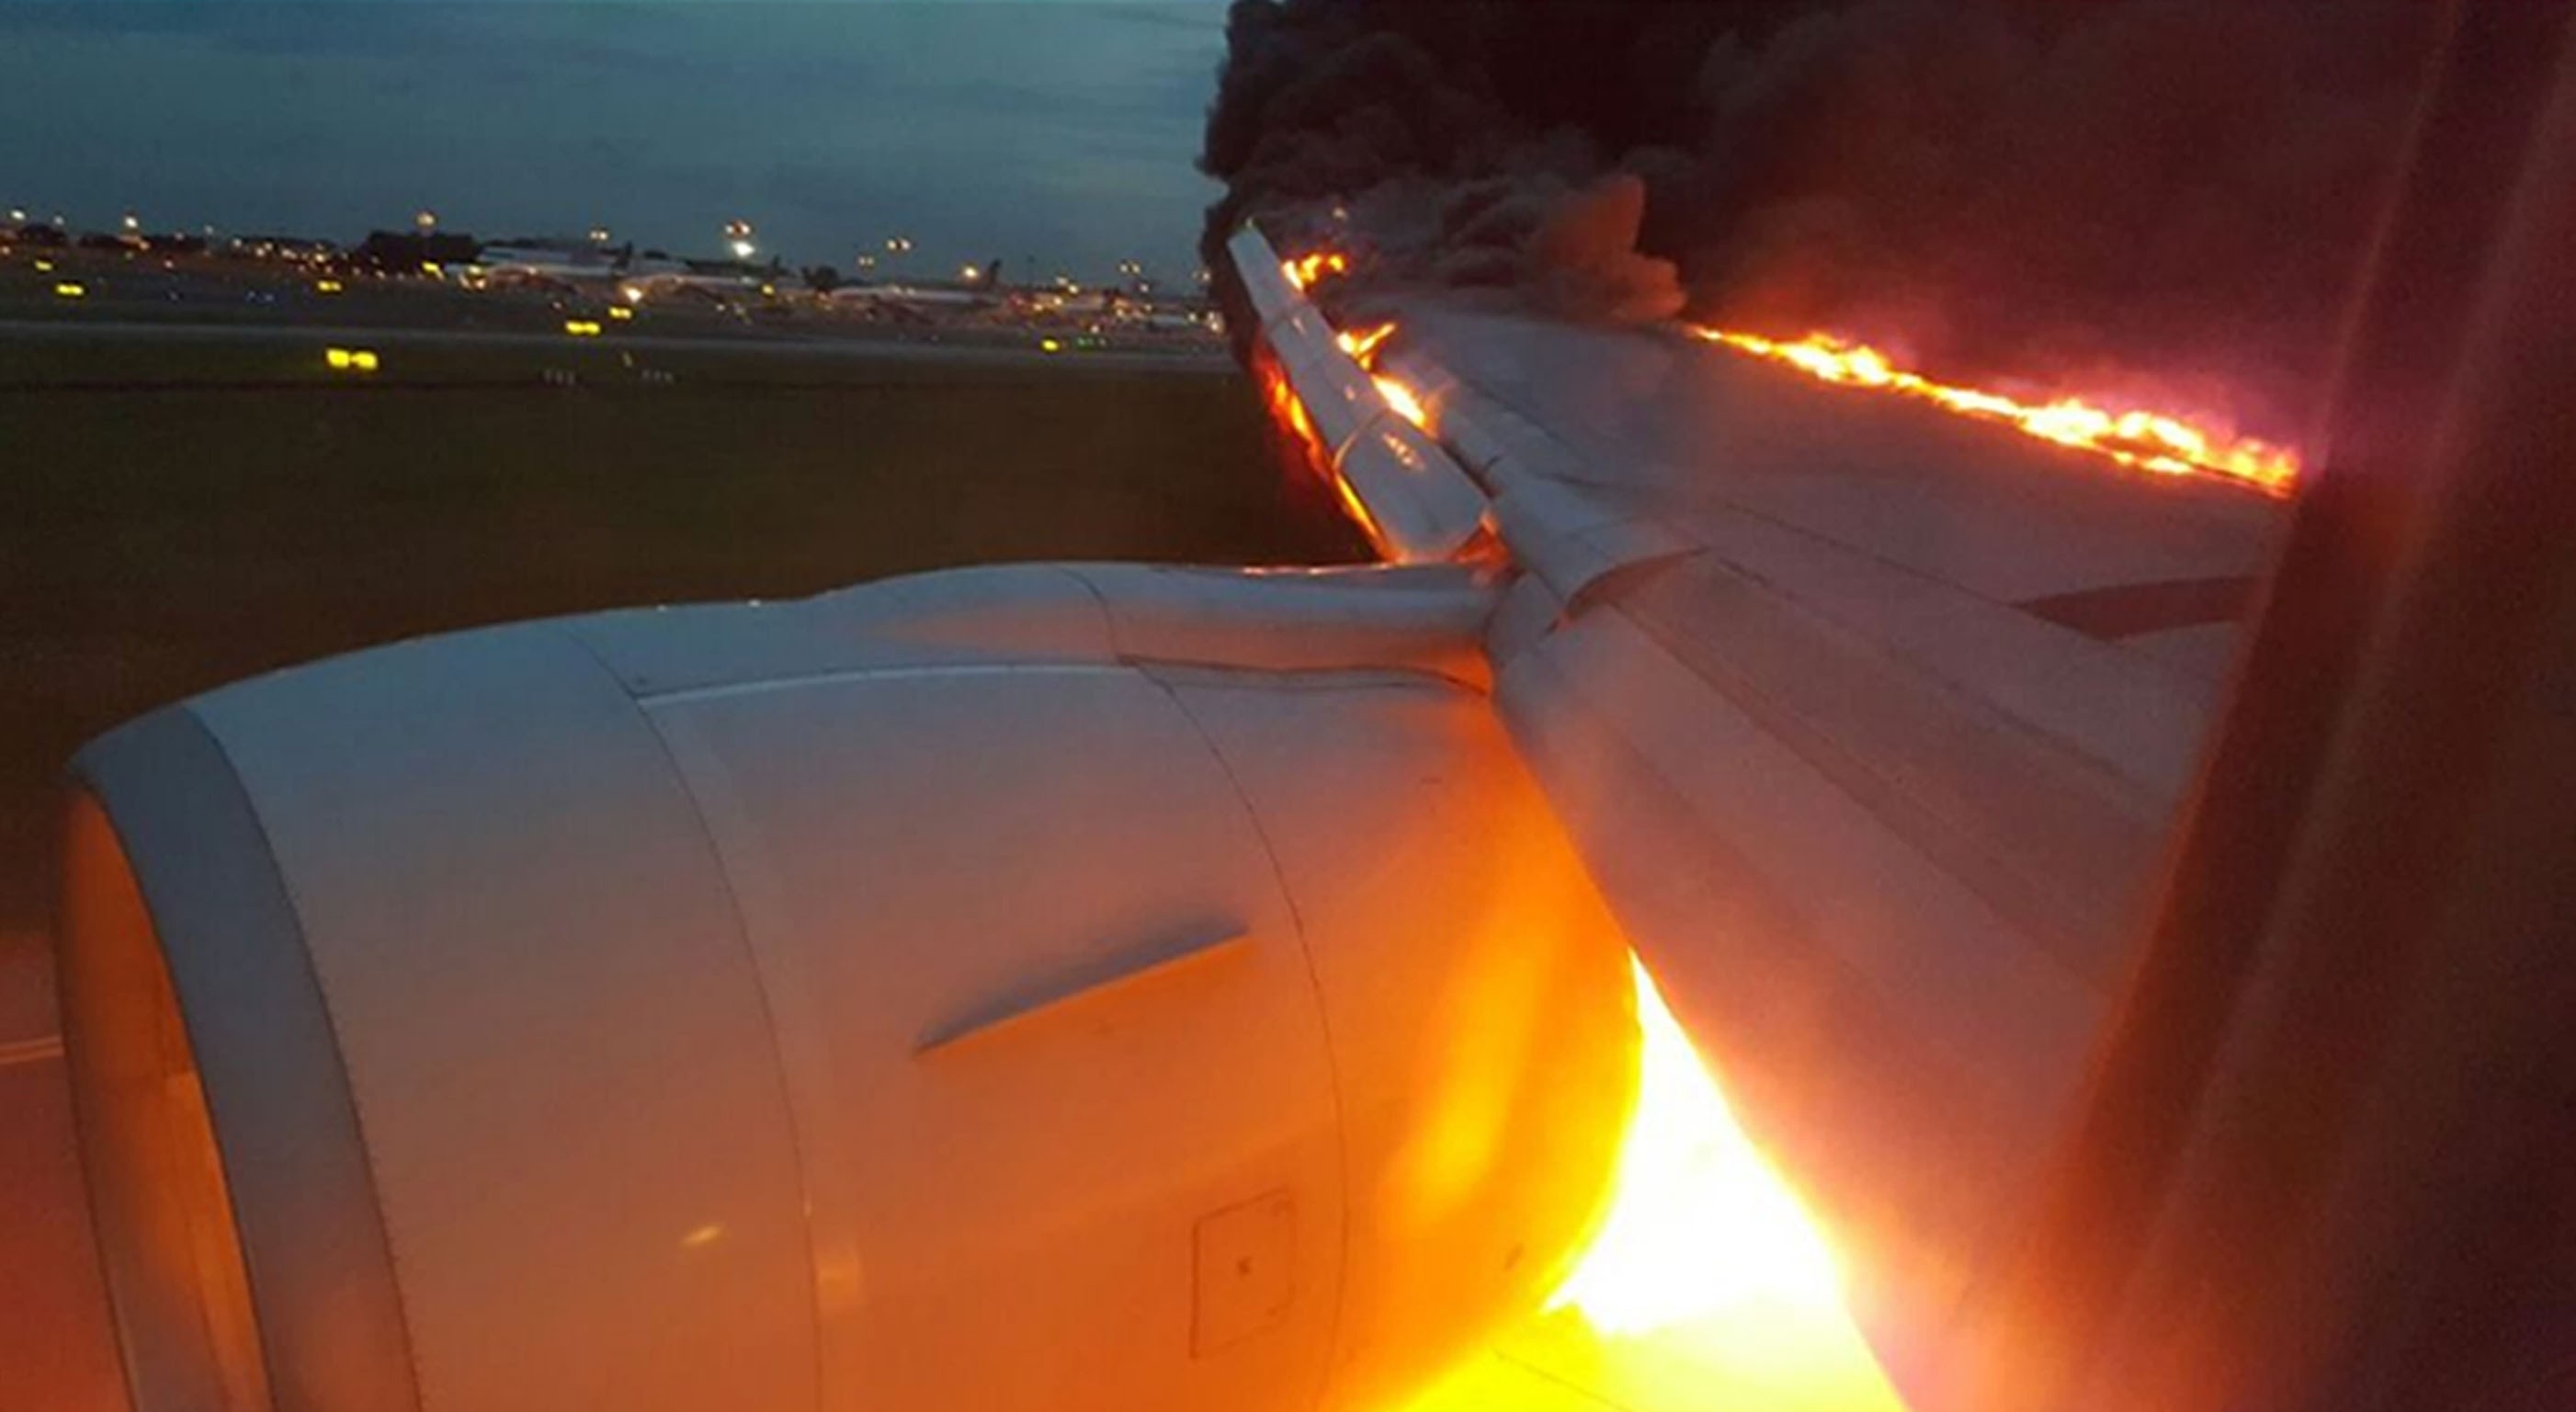 Image of the wing on fire - A Singapore Airlines plane